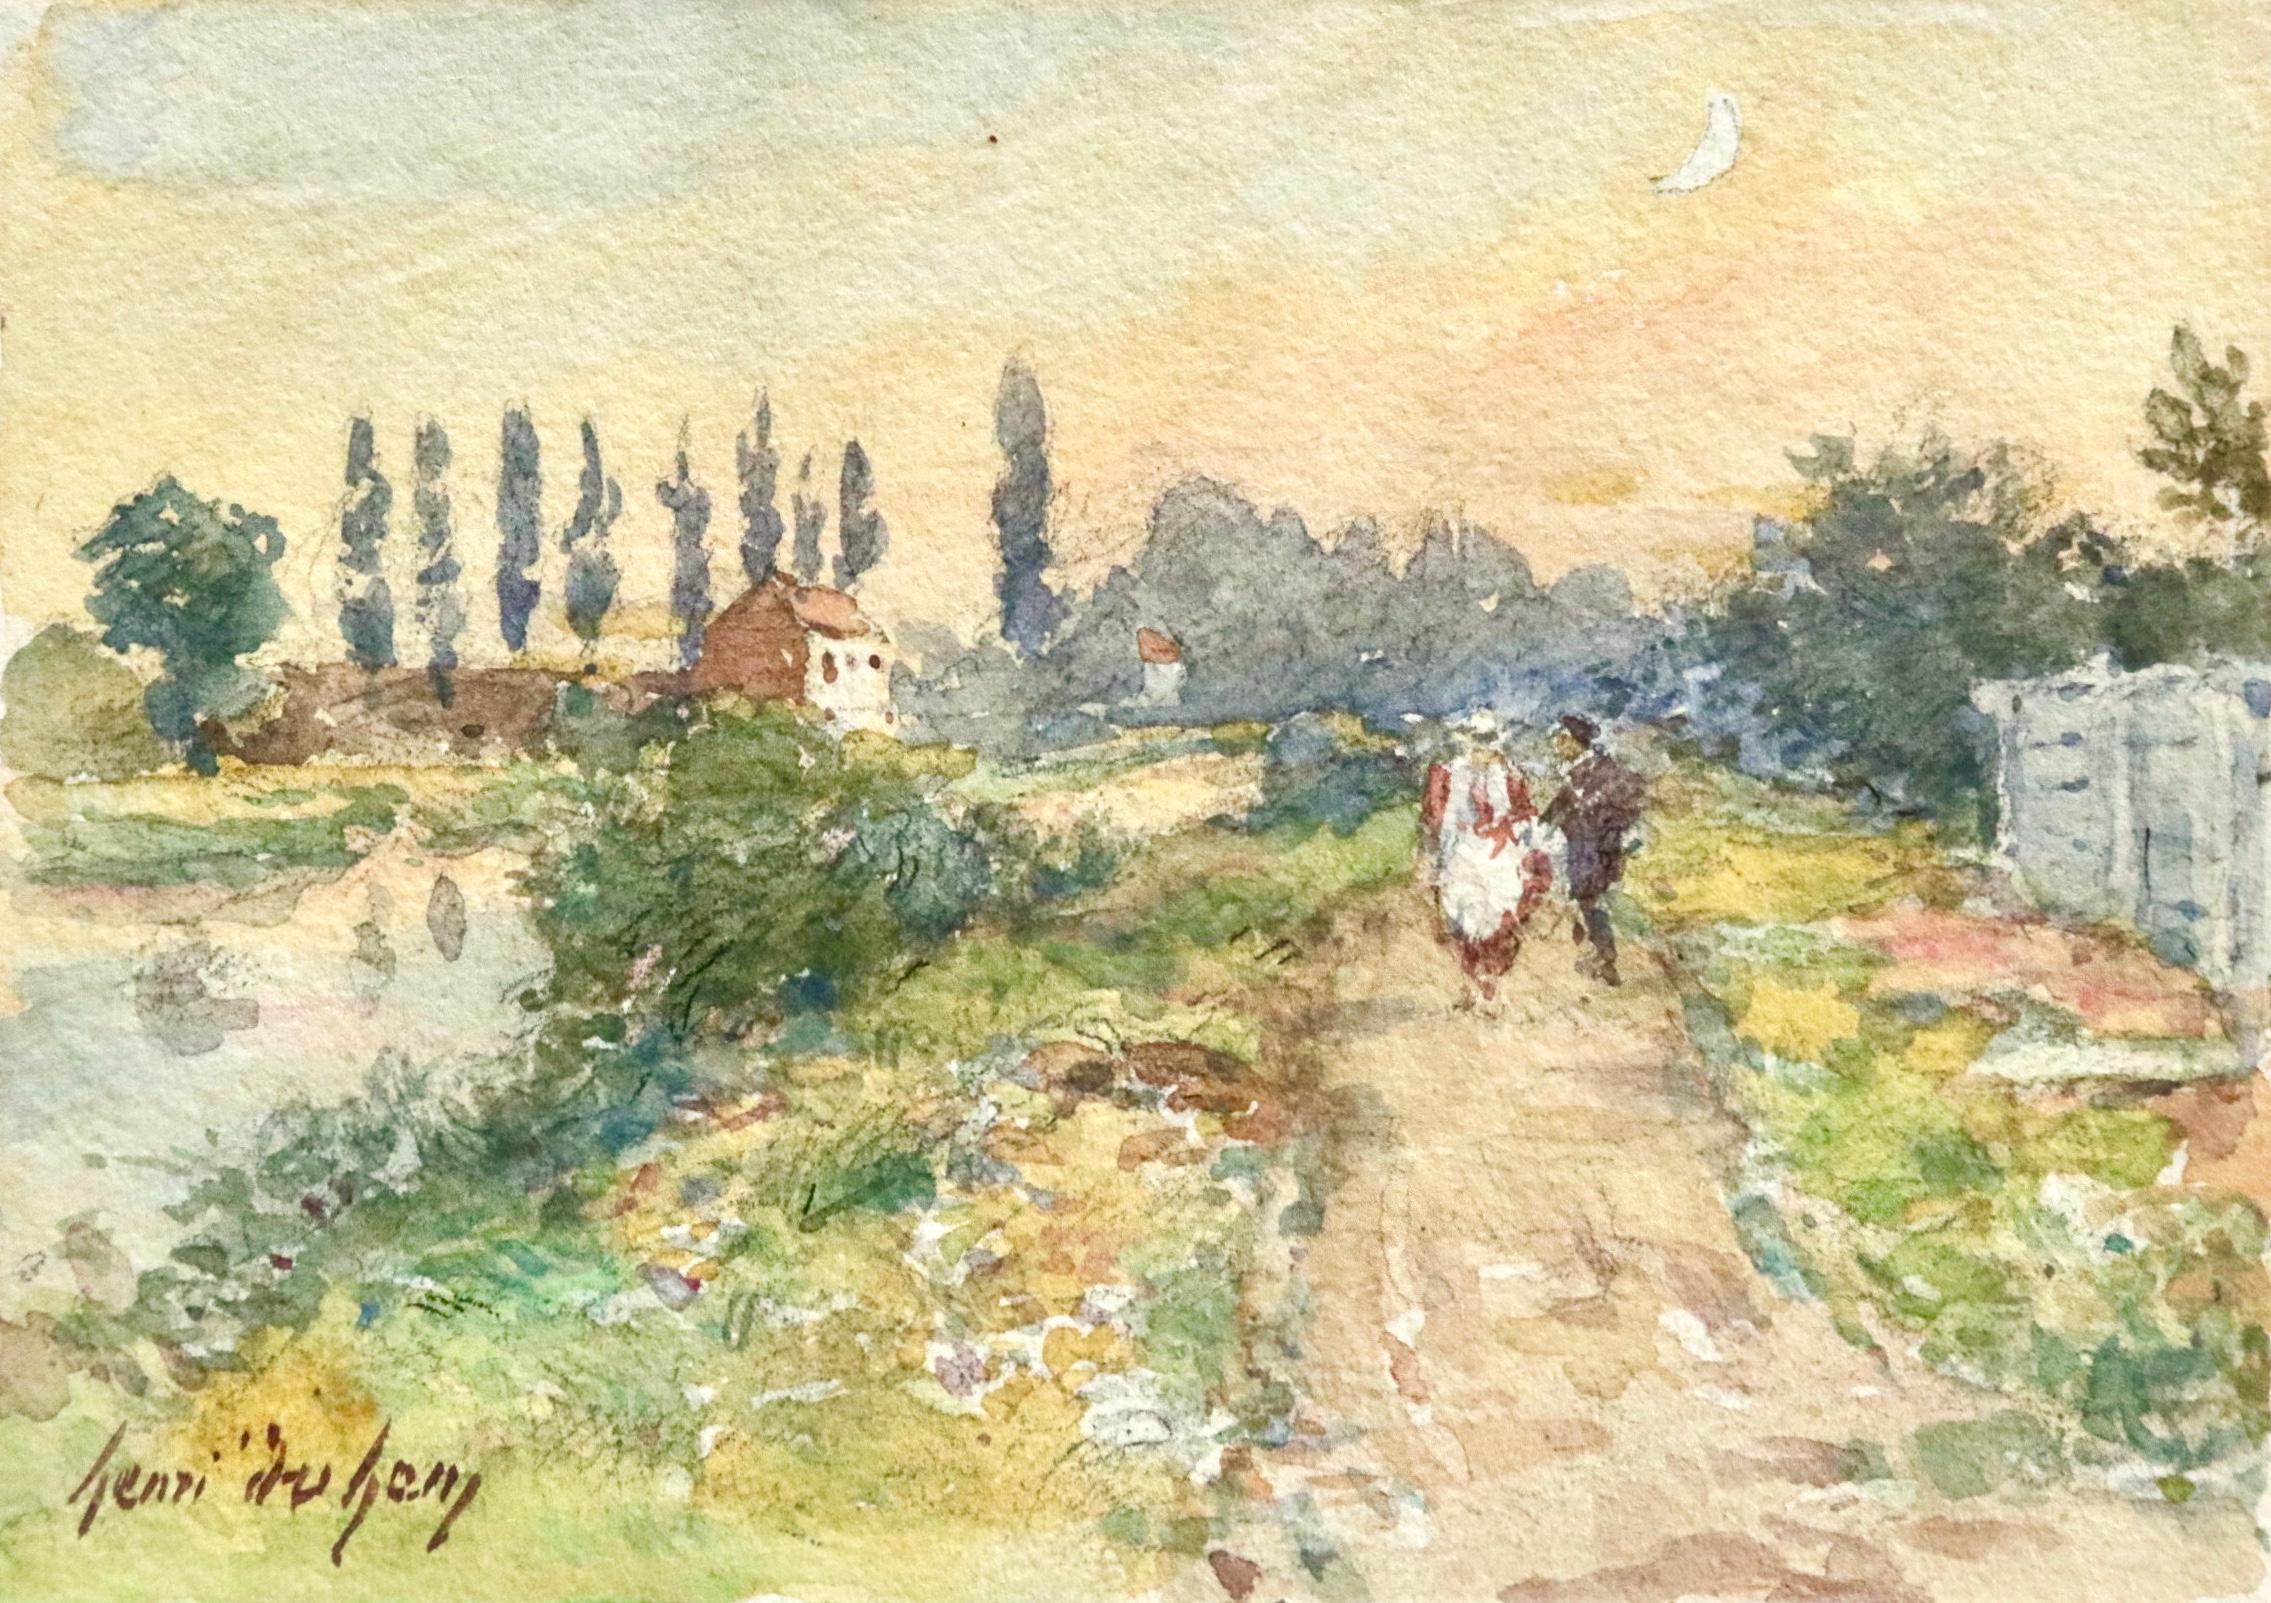 Courting - 19th Century Watercolor, Figures by River in Landscape by Henri Duhem